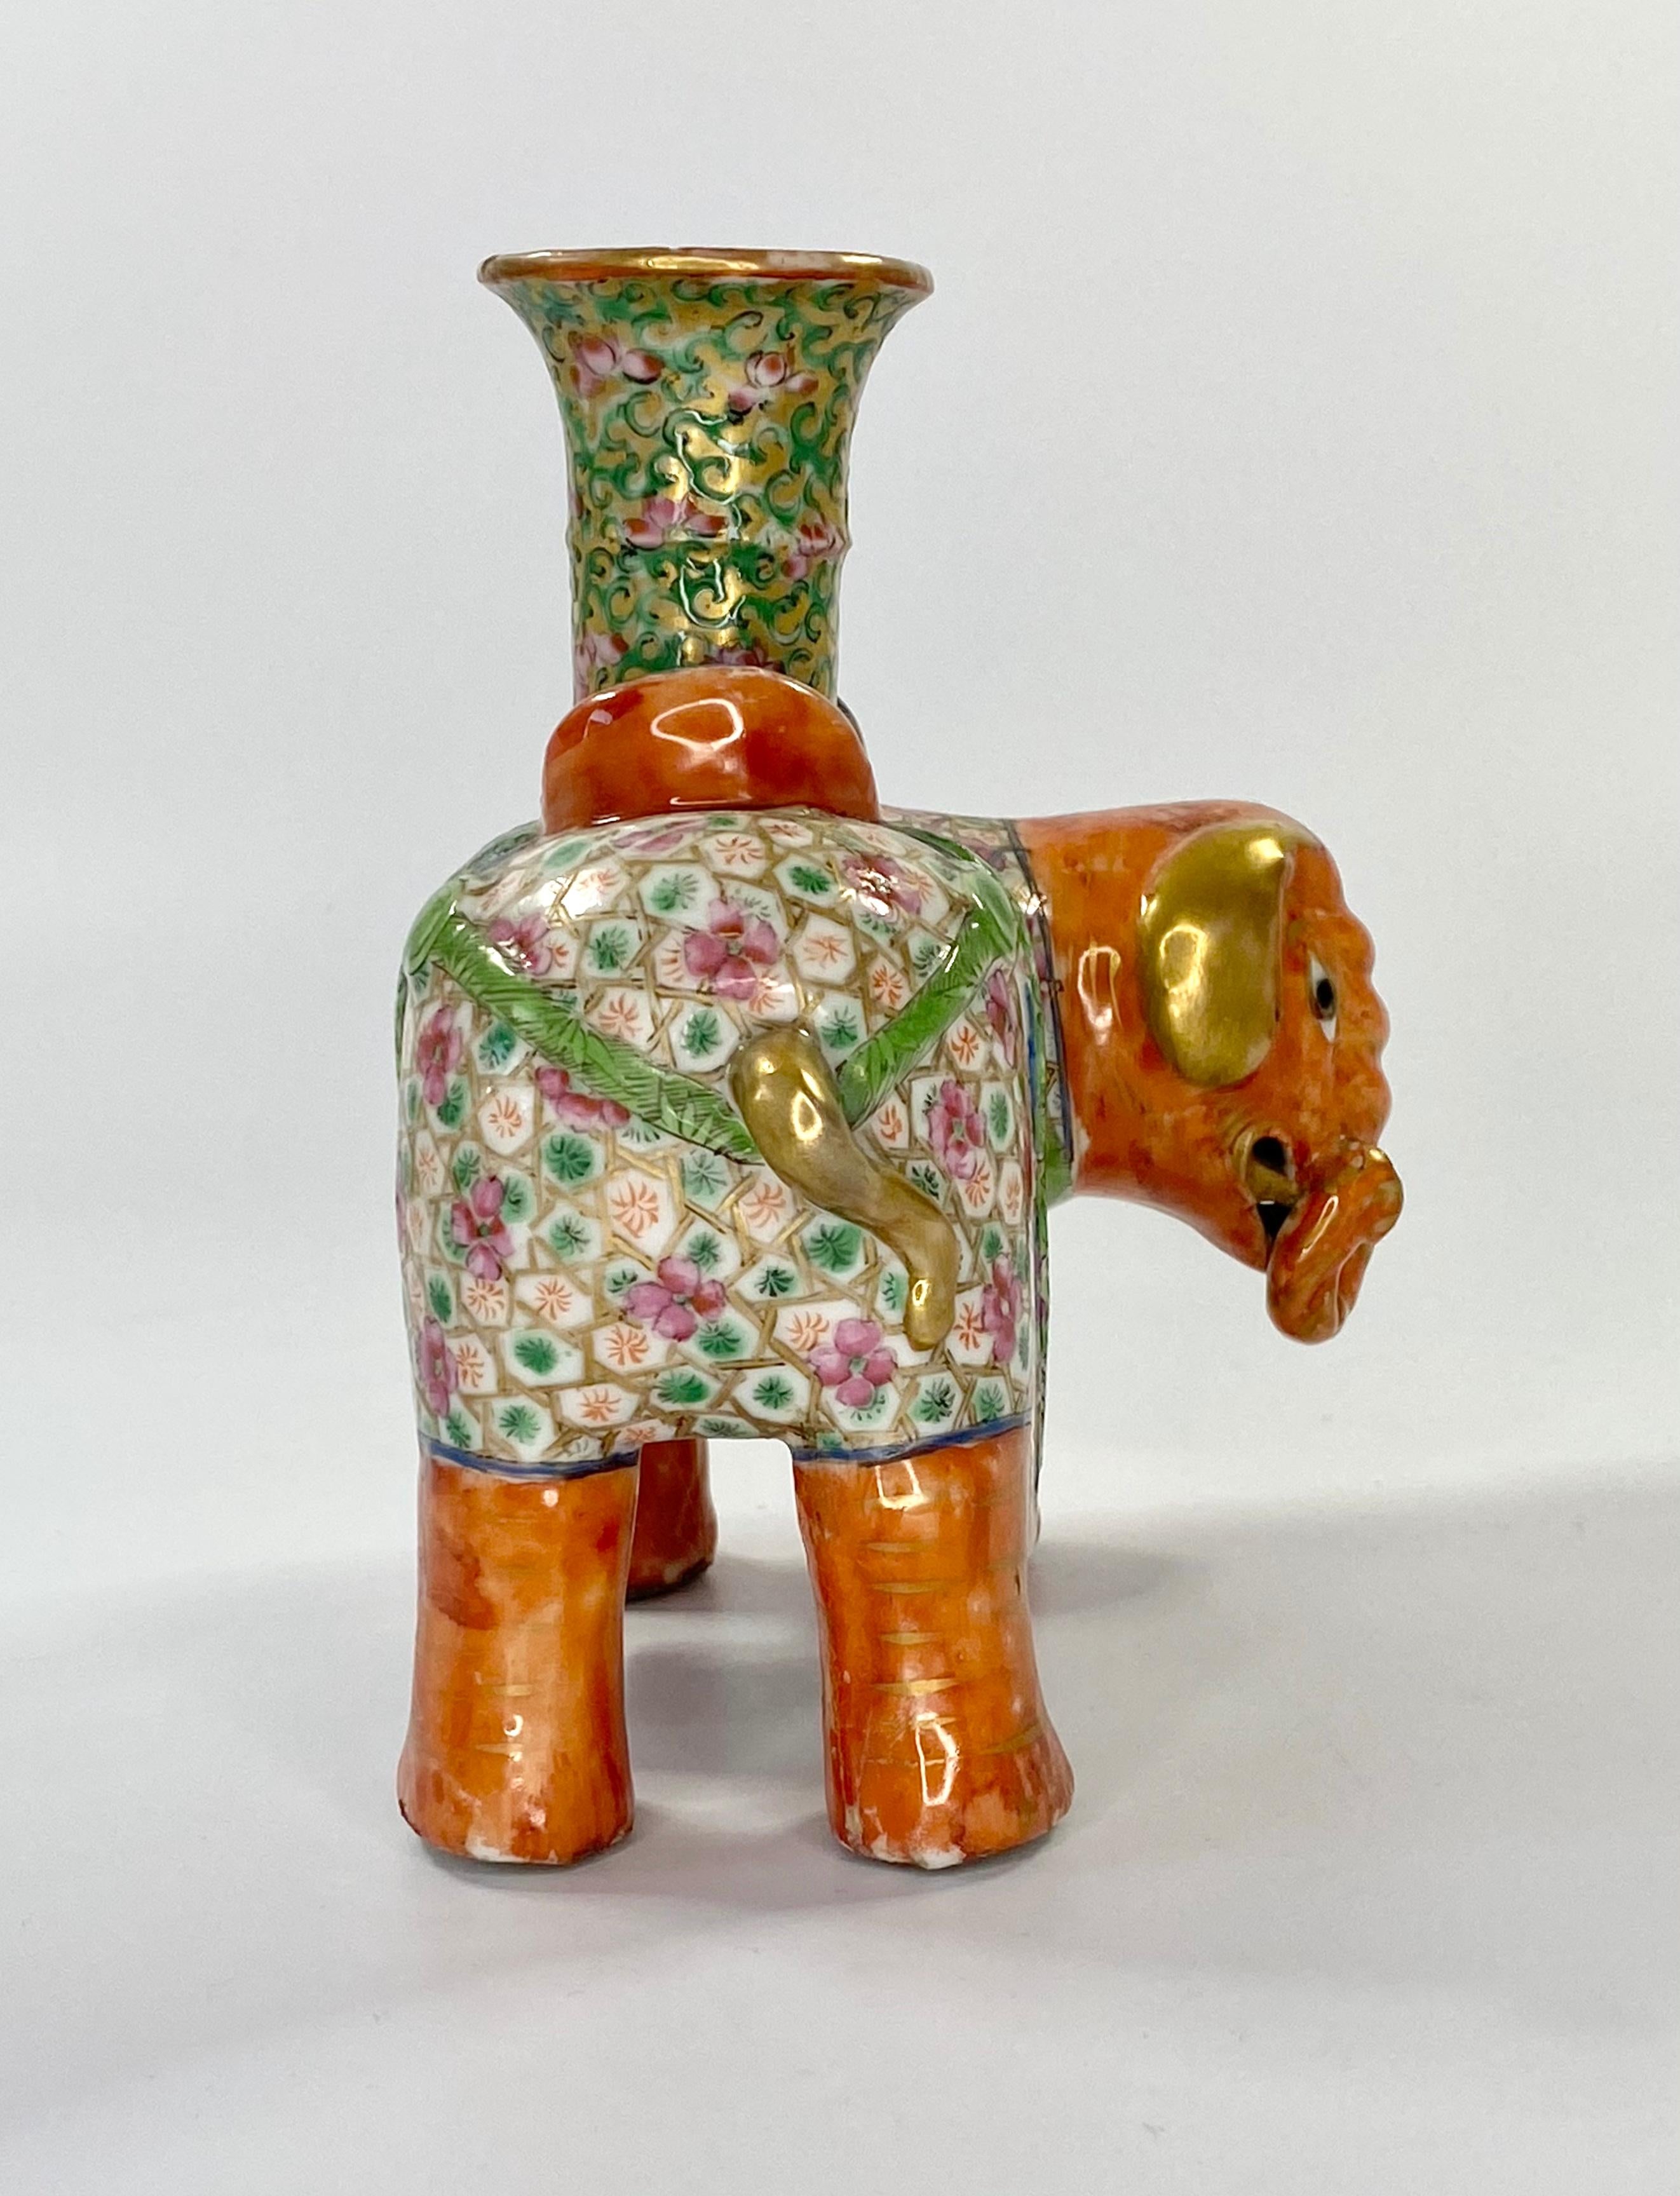 Mid-19th Century Pair of Chinese Porcelain Elephant Joss Stick Holders, circa 1850, Qing Dynasty